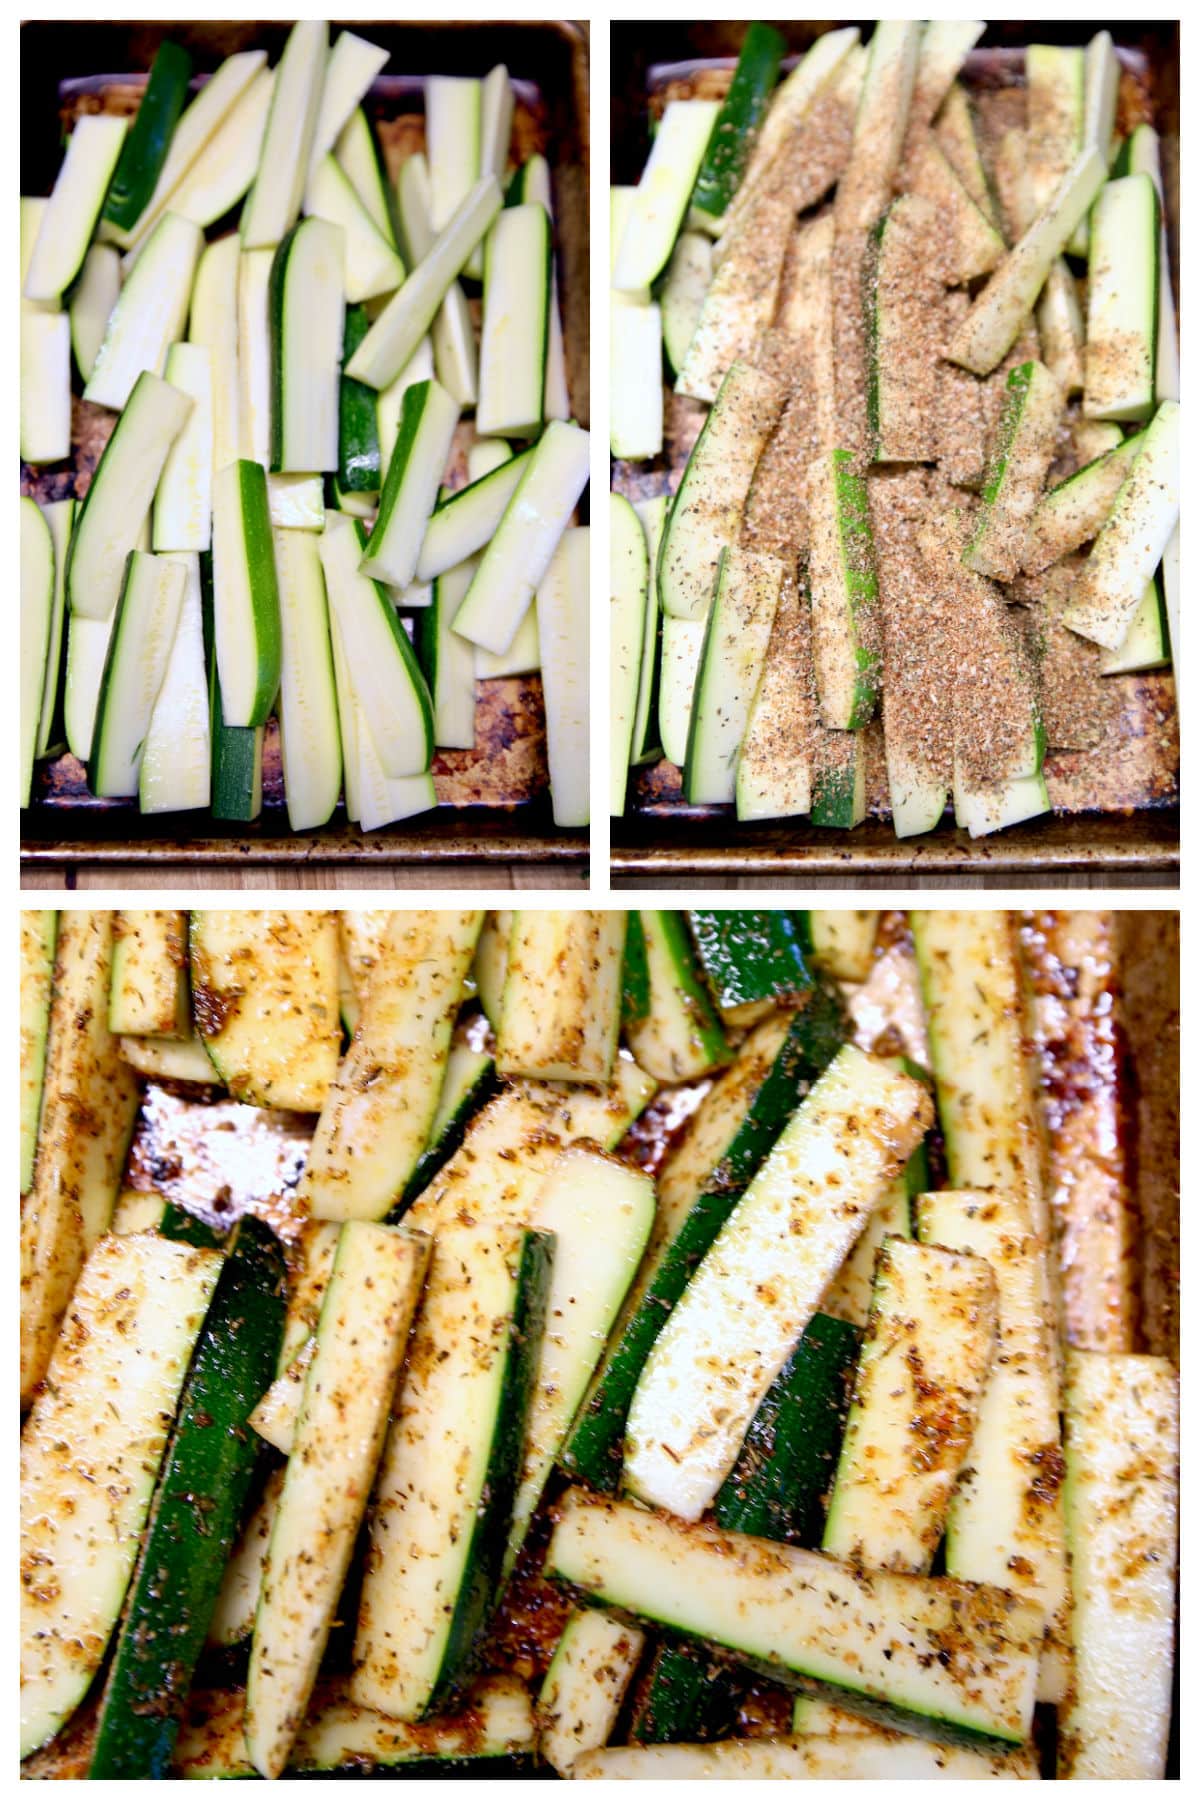 Collage: zucchini in wedges/ seasoned/Tossed with seasoning.